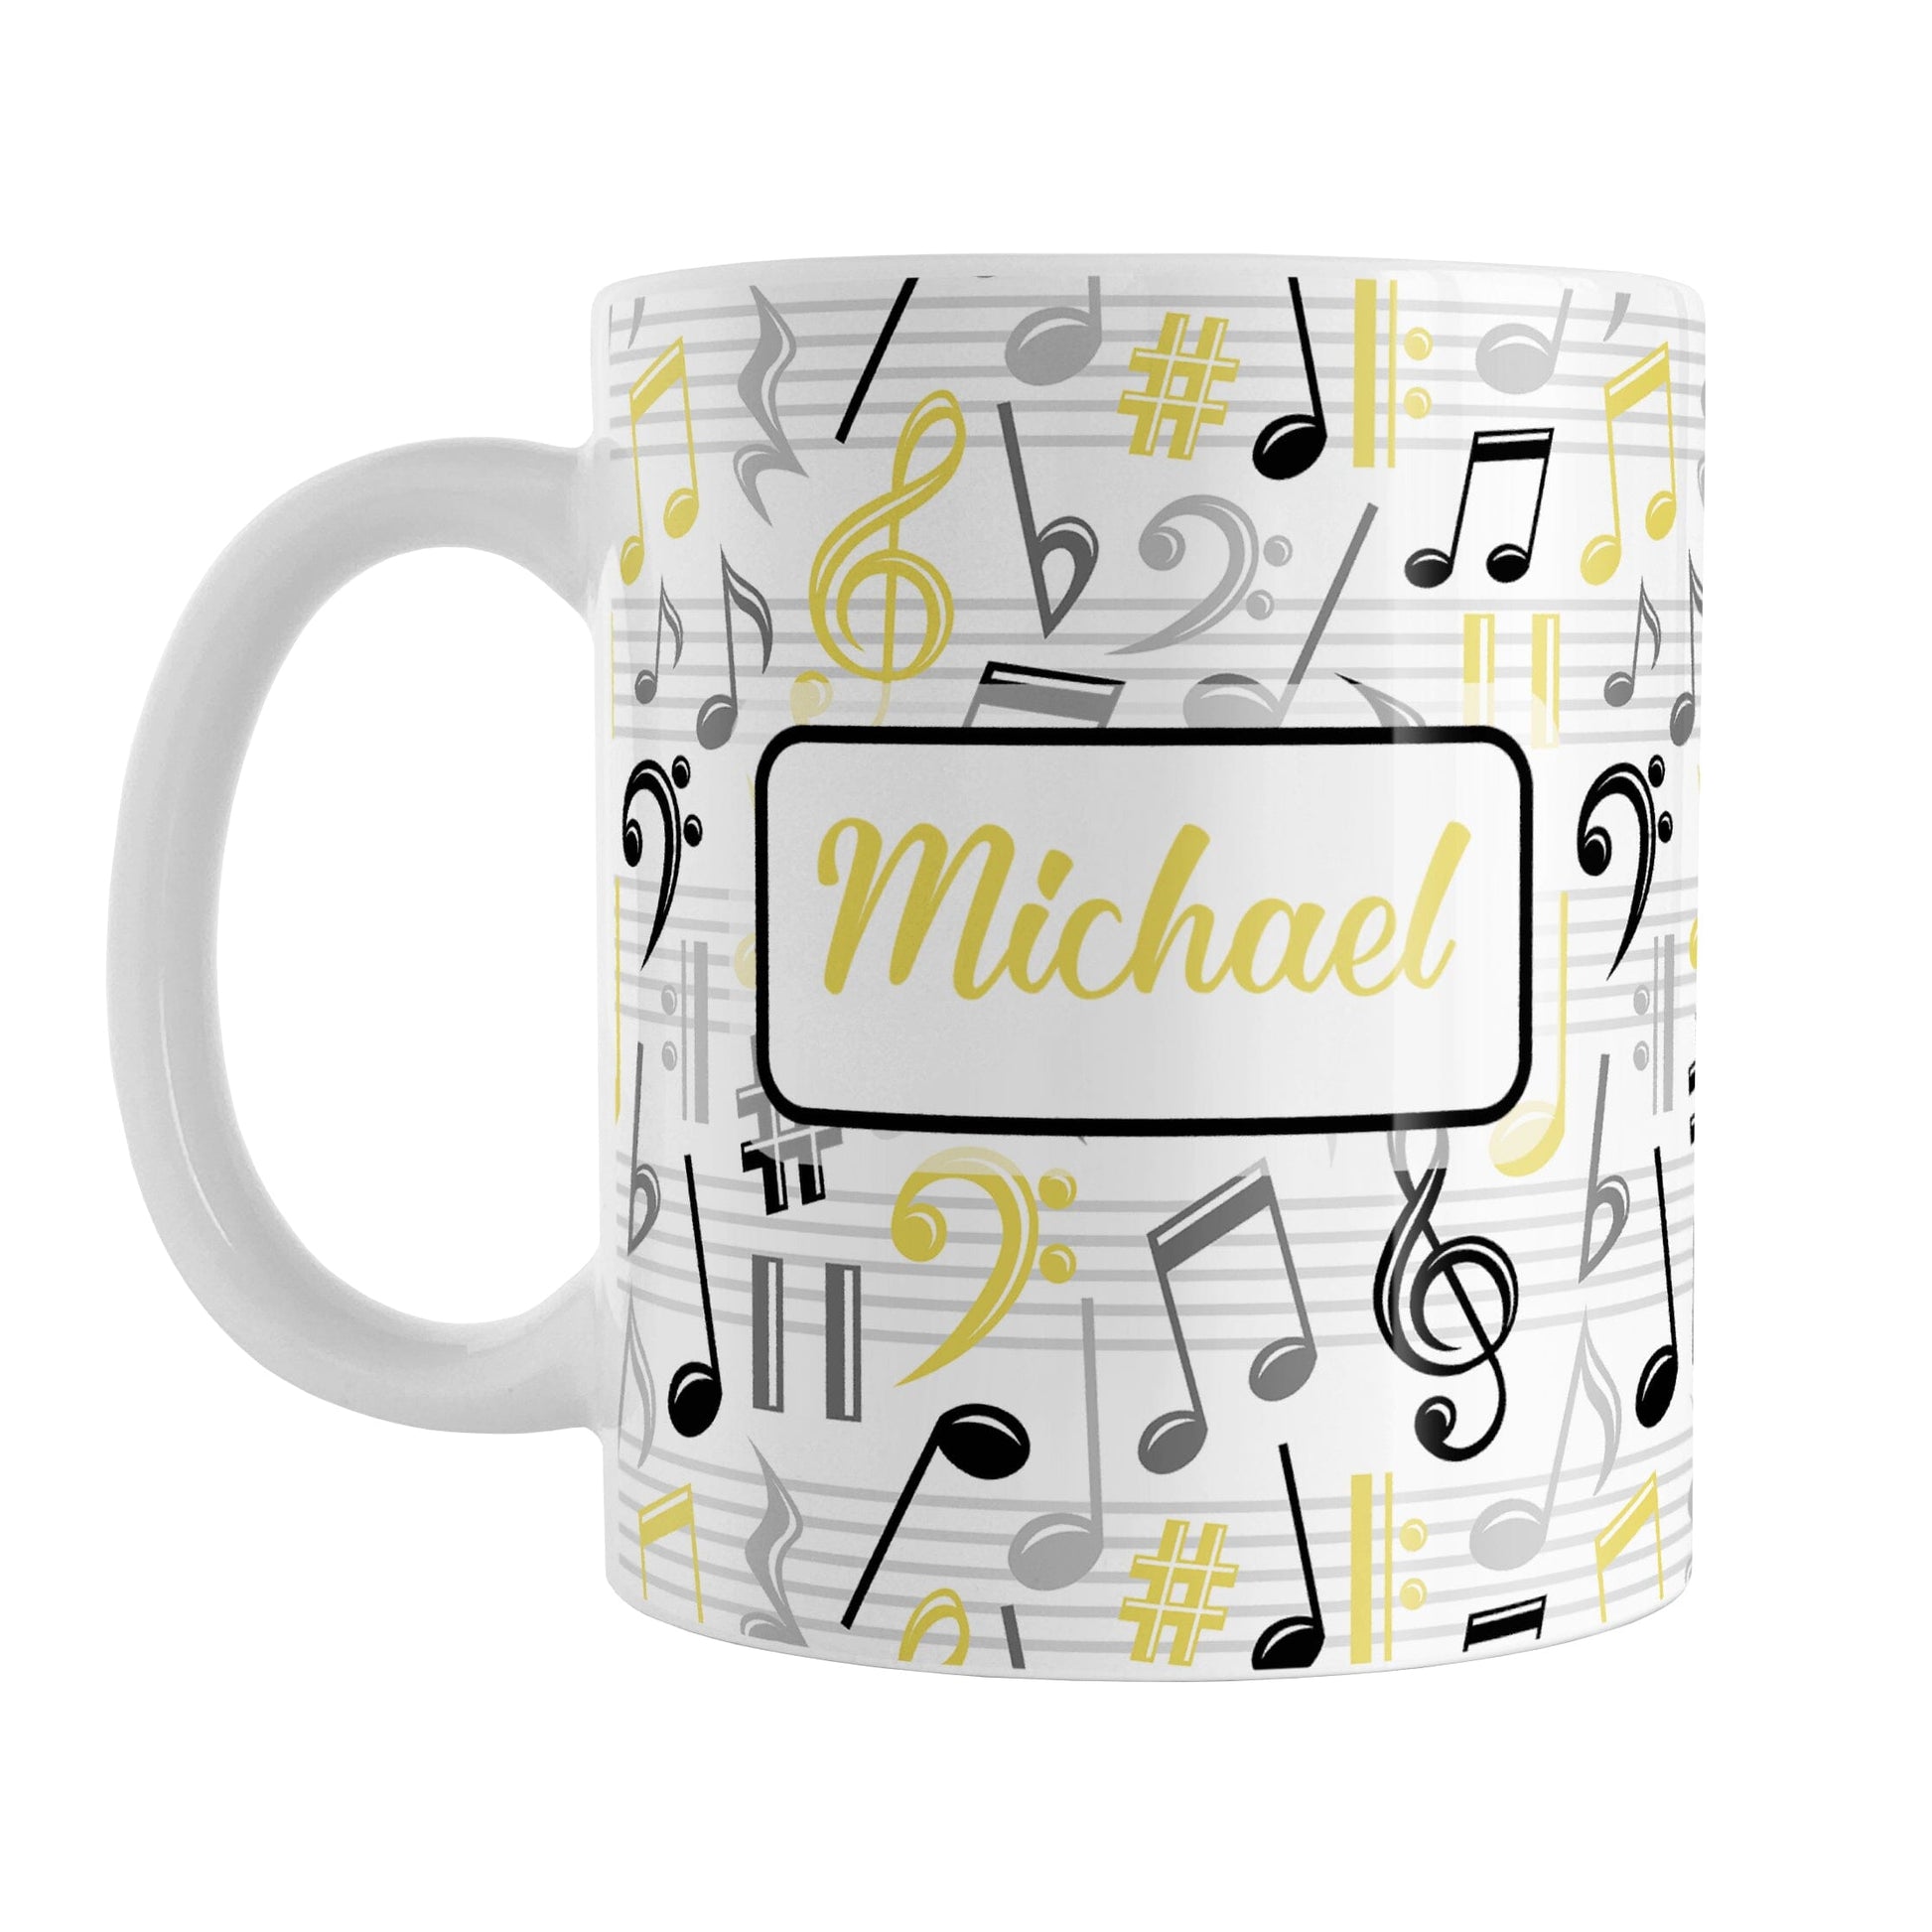 Personalized Yellow Music Notes Pattern Mug (11oz) at Amy's Coffee Mugs. A ceramic coffee mug designed with music notes and symbols in yellow, black, and gray in a pattern that wraps around the mug to the handle. Your personalized name is custom printed in a yellow script font on white over the music pattern design on both sides of the mug.